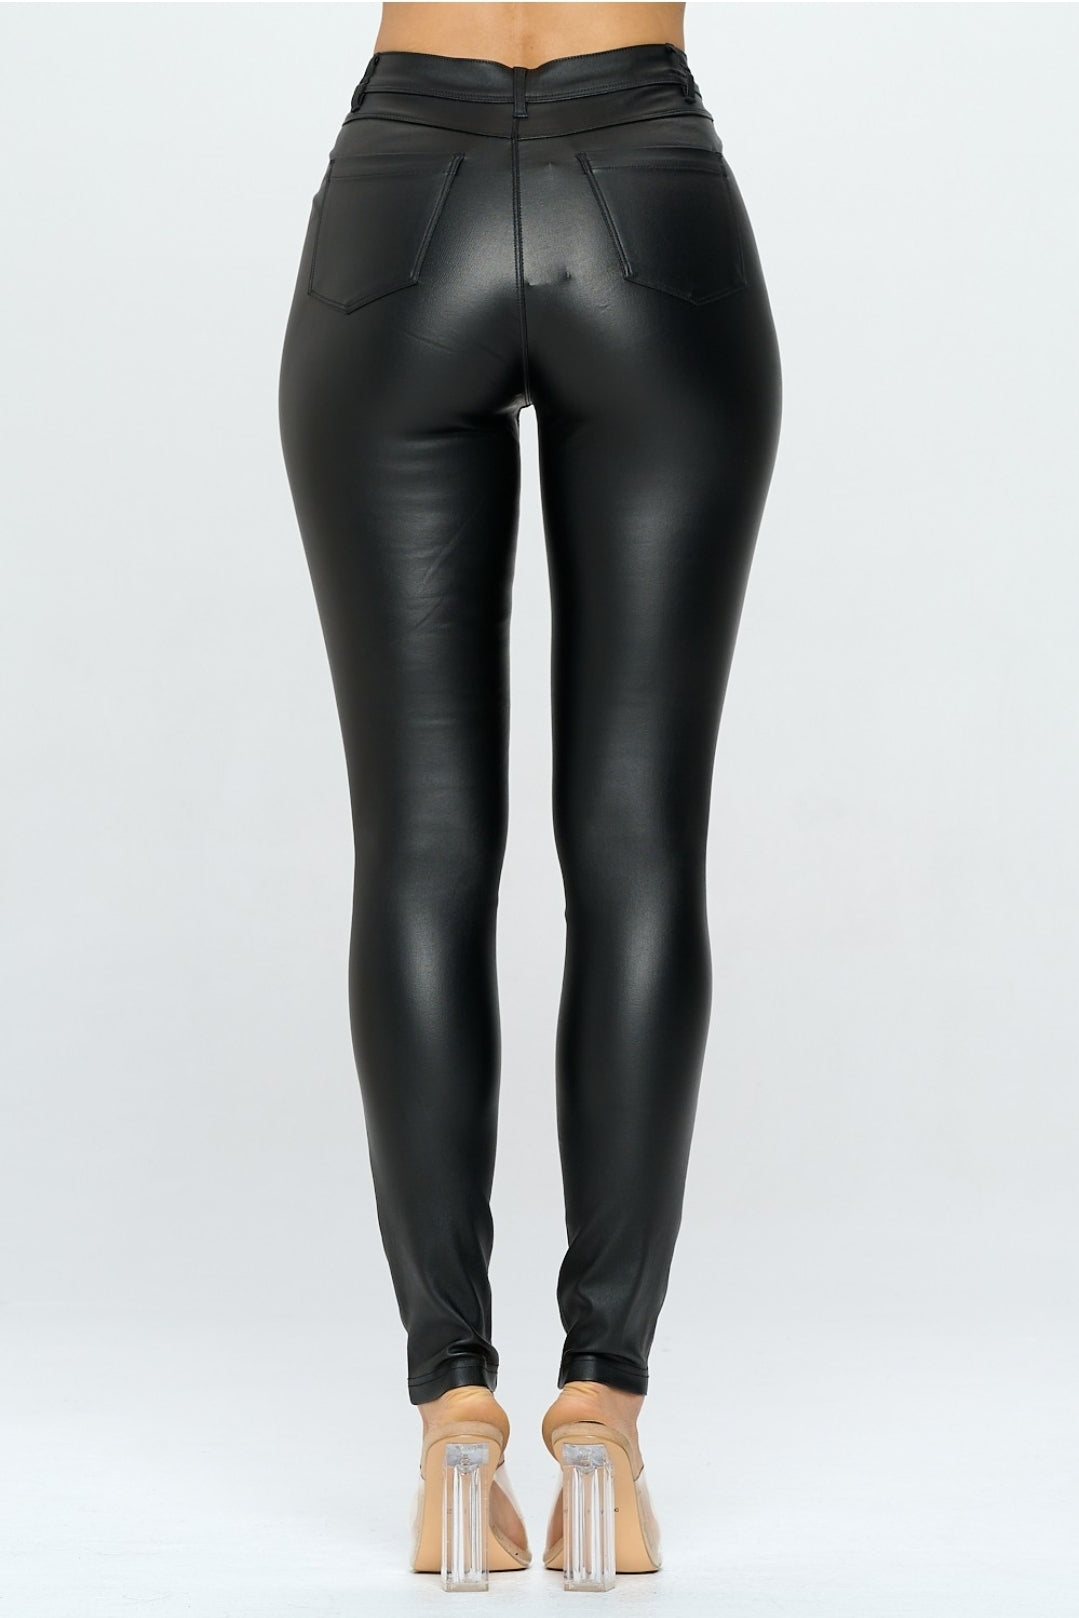 Black Leather Pants Jeans - High Waisted (Stretchy) – Adami Dolls